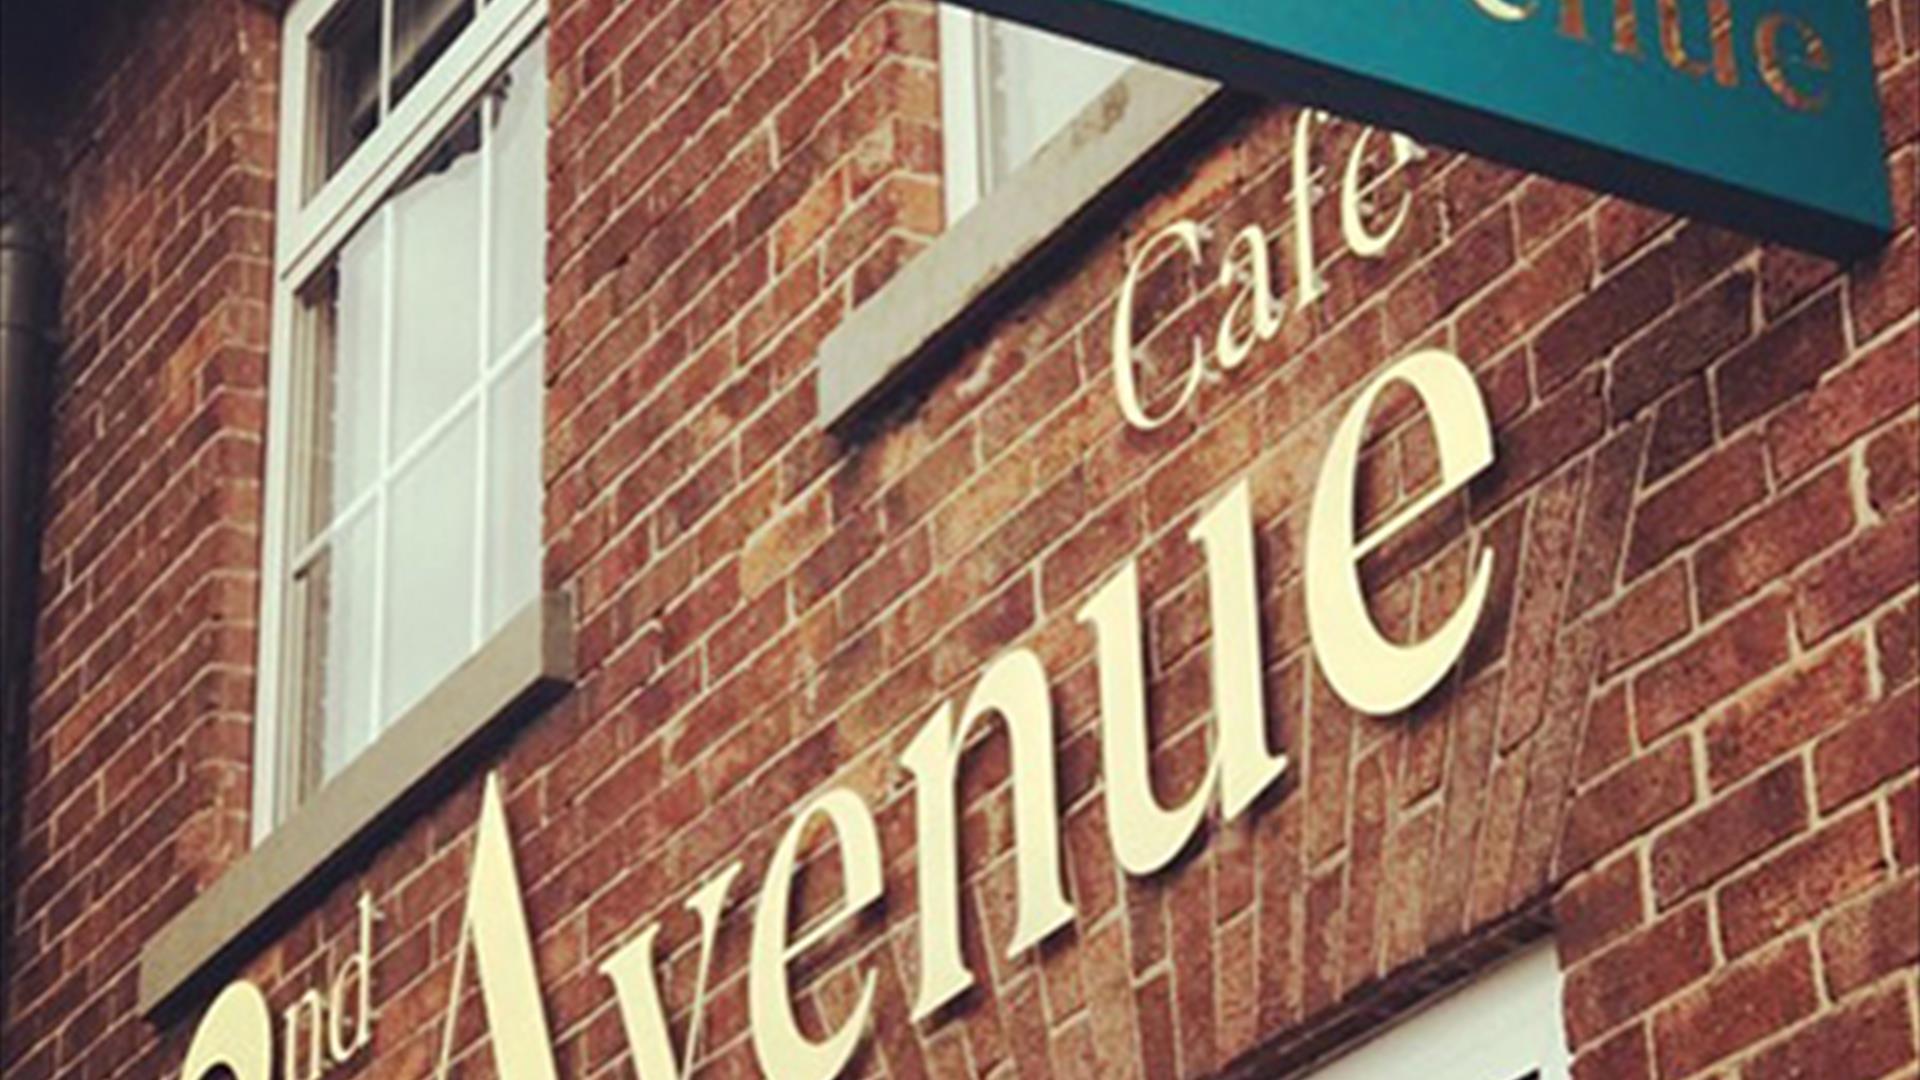 Image shows front of 2nd Avenue Cafe with named sign